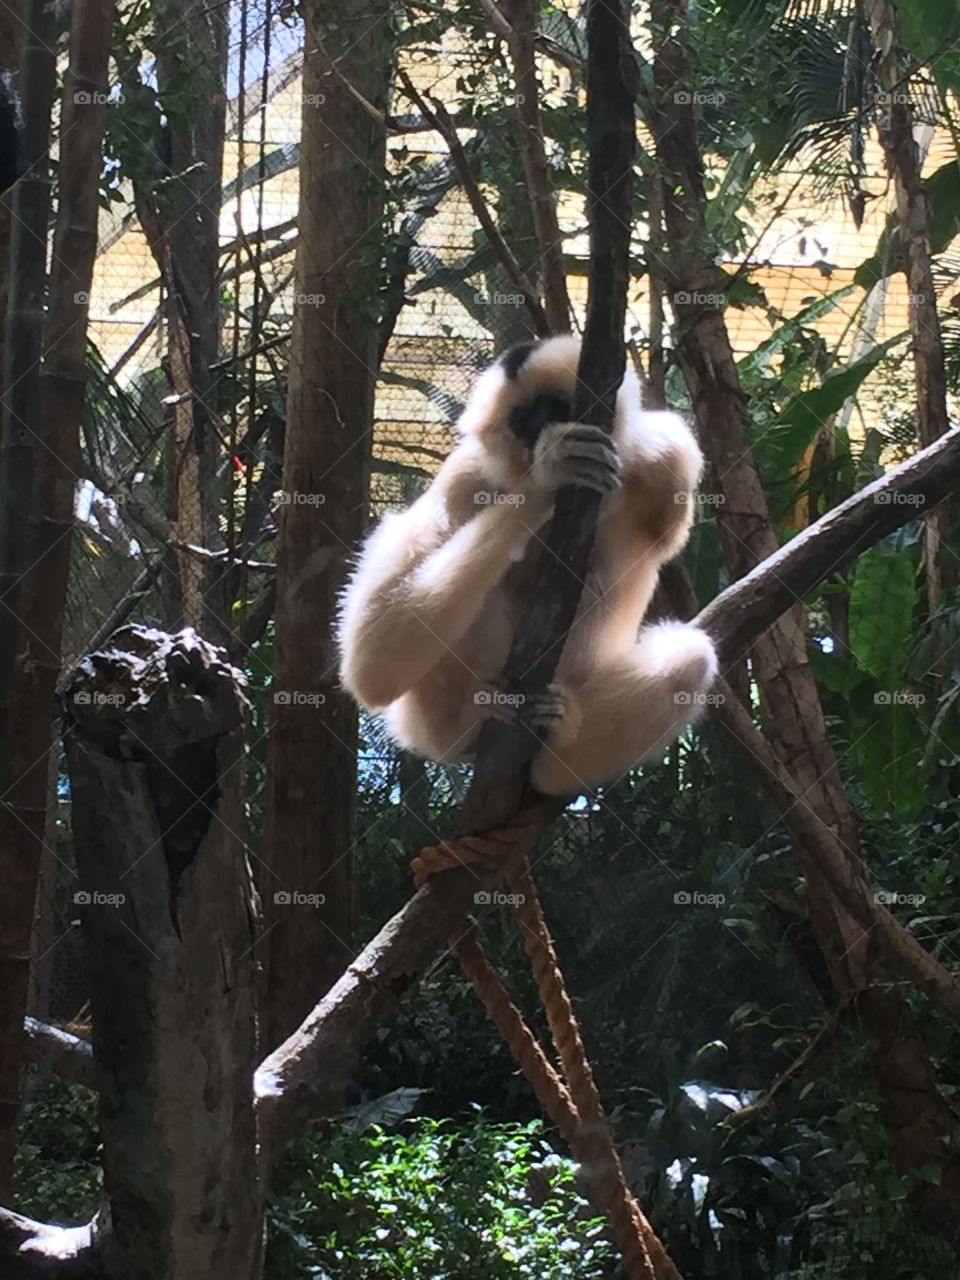 The one-armed monkey at the zoo 